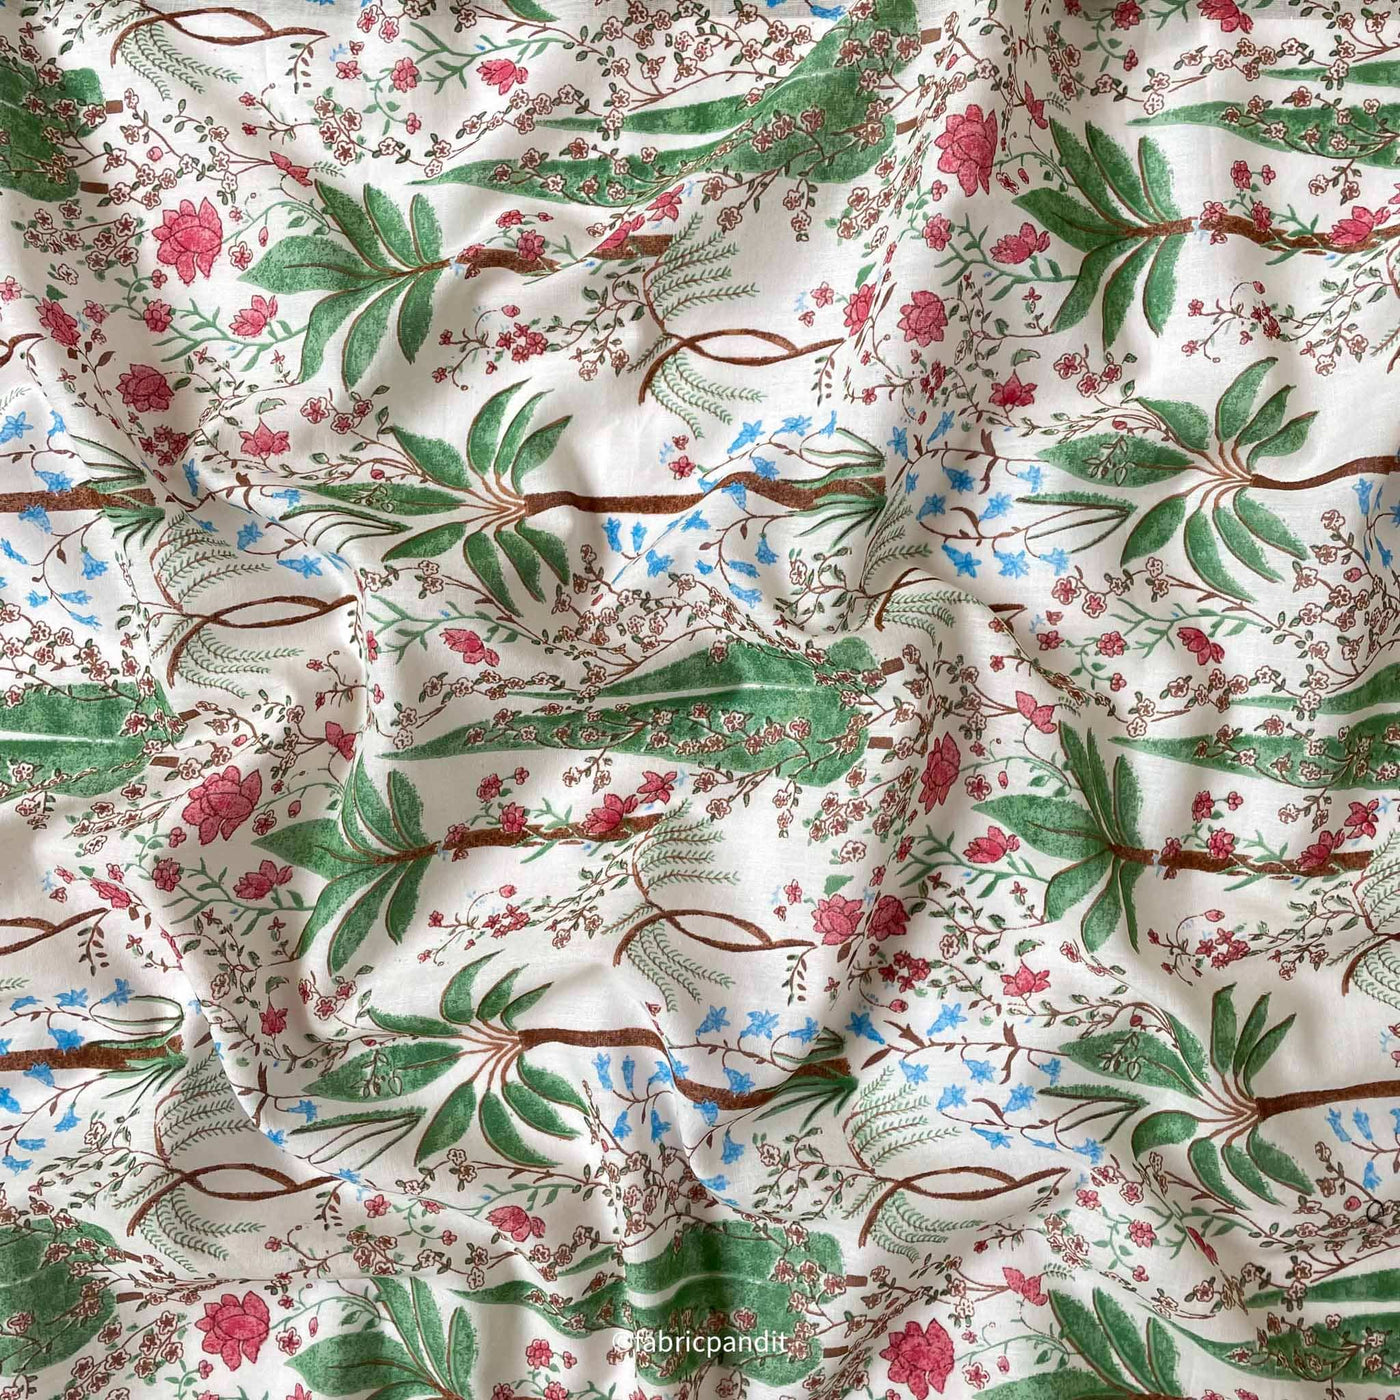 Organic Cotton Printed Fabric by Oasis International, Made in India